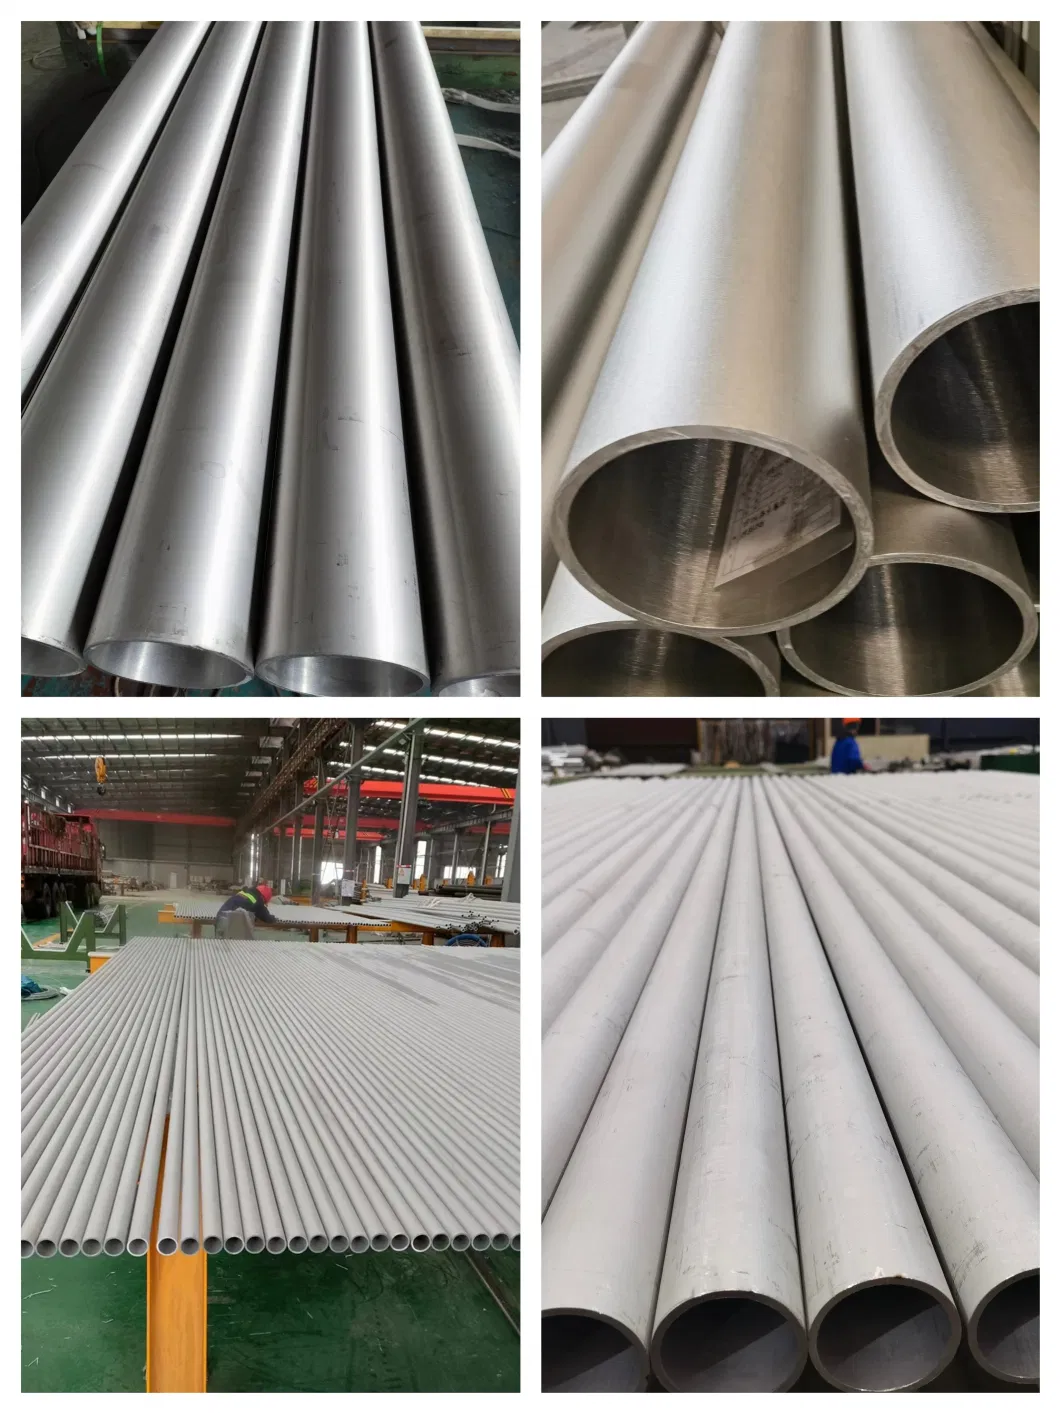 Hot Sale ASTM A312/A213 301/304/309/316 Pickling Stainless Steel Pipe Sanitary Piping ERW Ss Welded